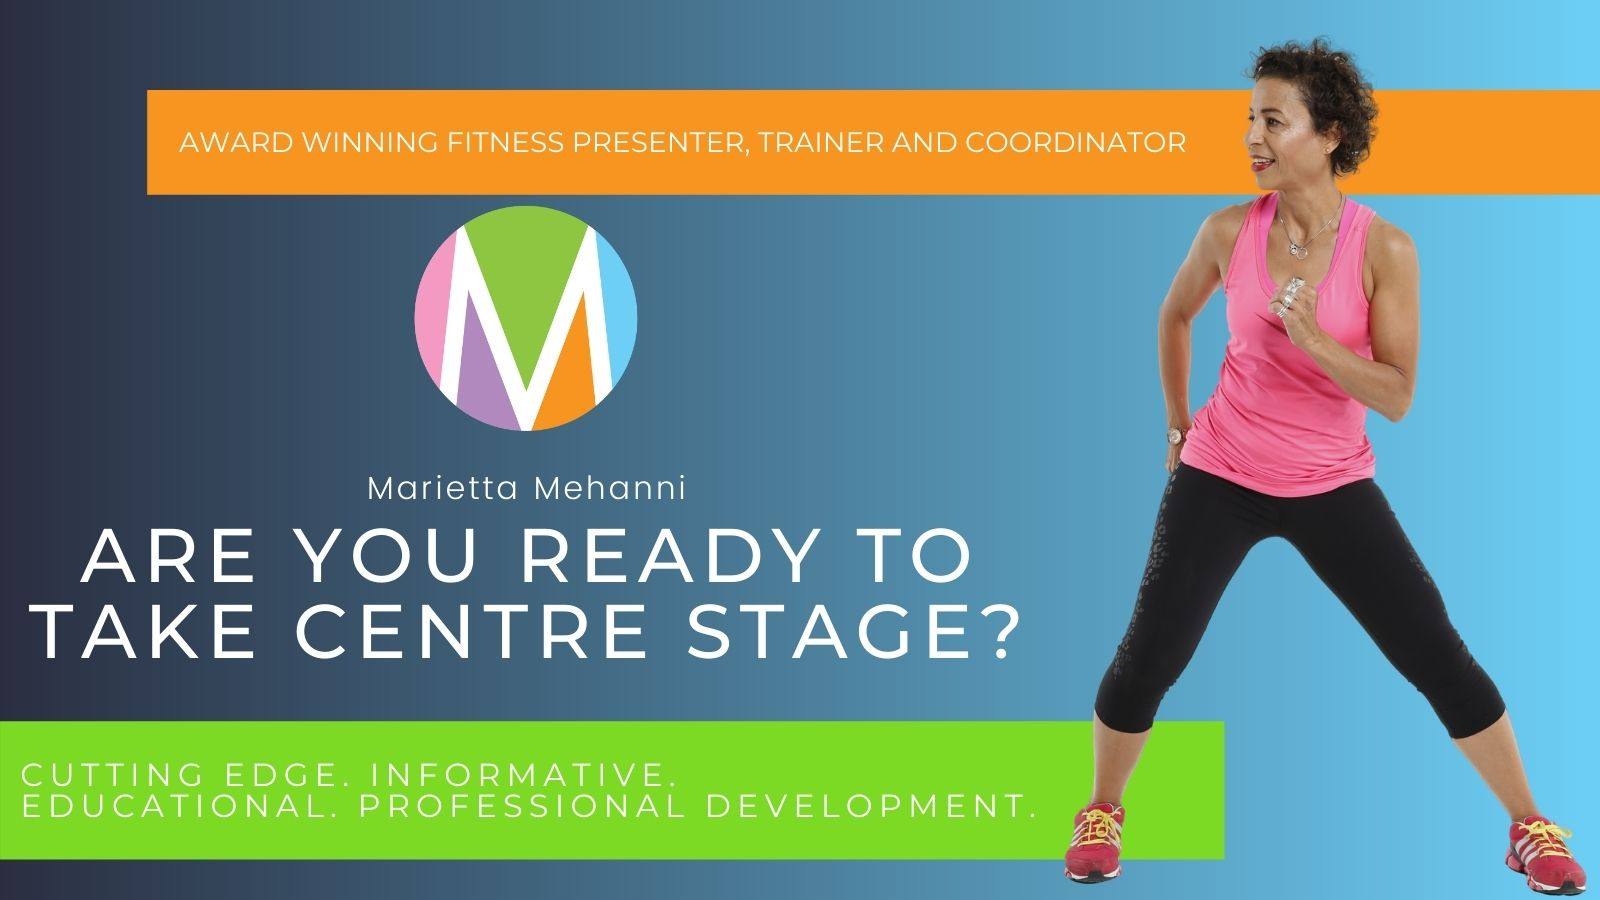 Are you ready to take centre stage marietta mehanni education professional development group fitness personal training informative fitness guru presenter